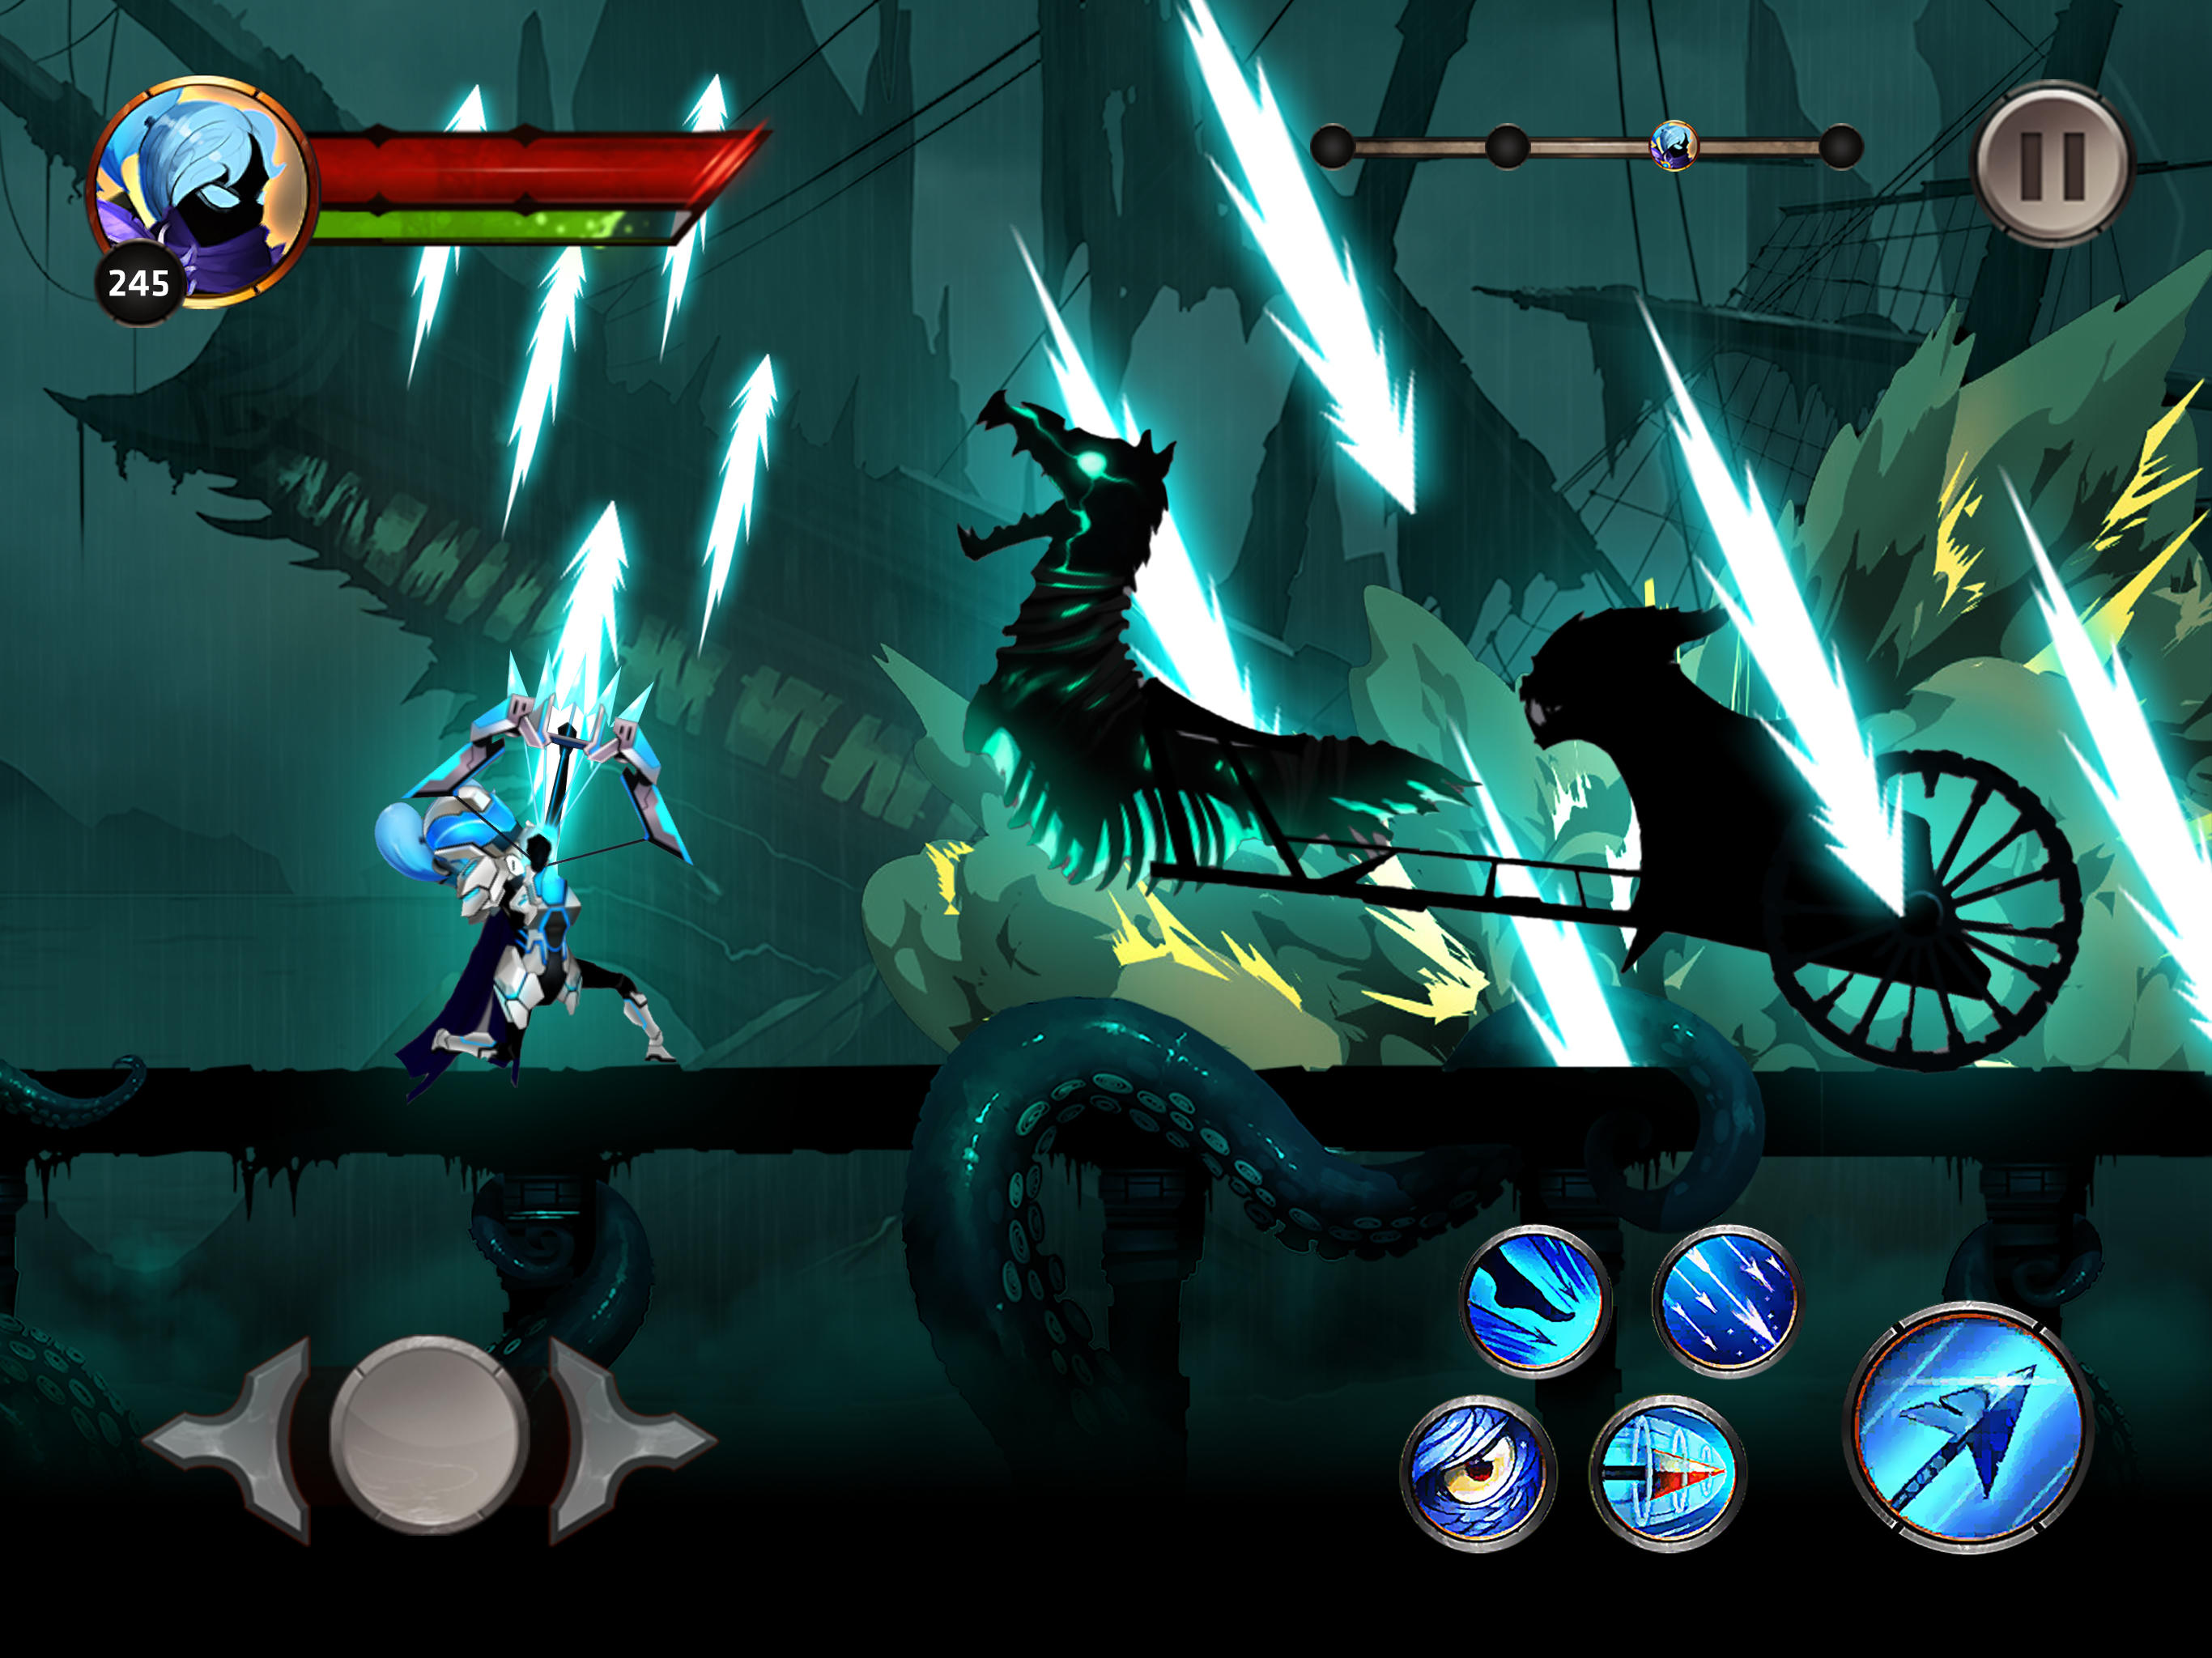 Stickman PvP Online - Dragon Shadow Warriors Fight Mobile Games 